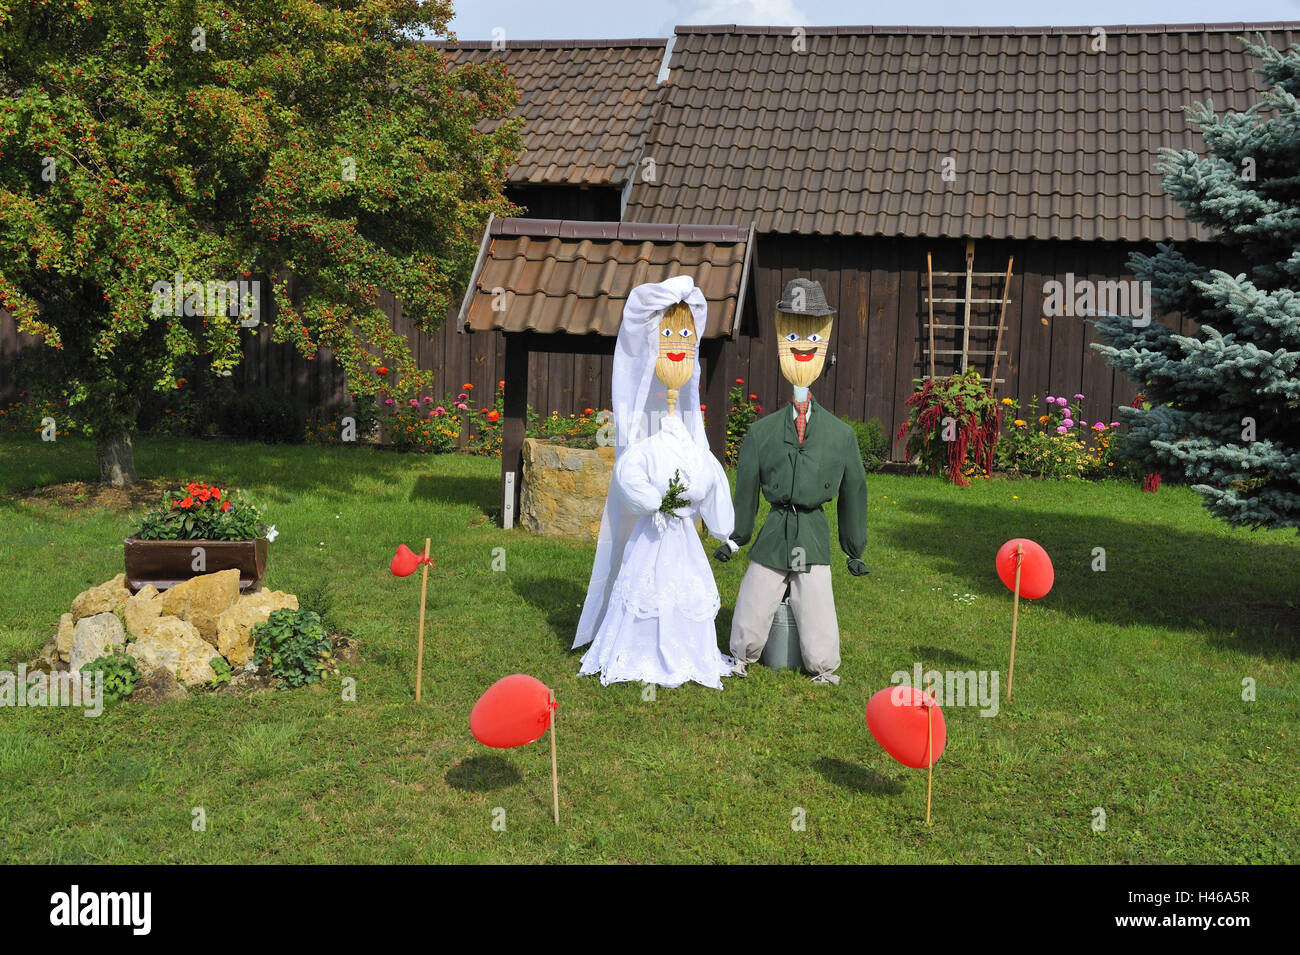 wooden hut, garden, scarecrows, meadow, scarecrow couple, clothing, care, suit, wedding dress, broom, dolls, 'wedding couple', scare away, deterrence, balloons, red, hut, trees, fruit-tree, fir, flowers, sunshine, Stock Photo